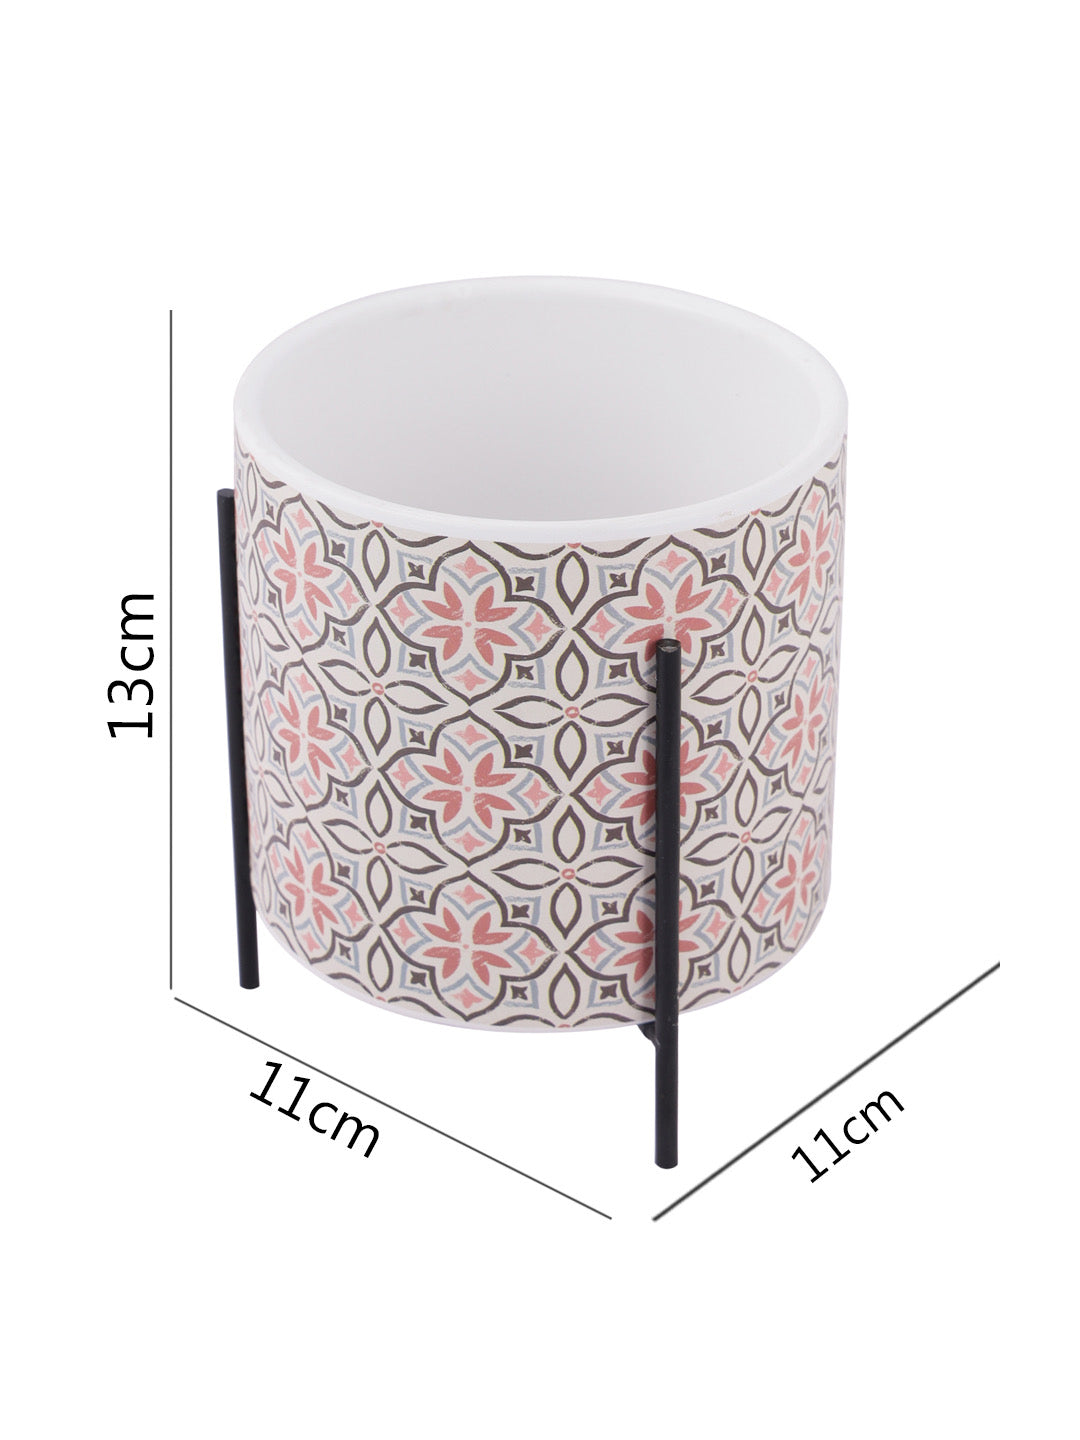 Honeycomb print Planter with Black Stand - Default Title (CH210041)